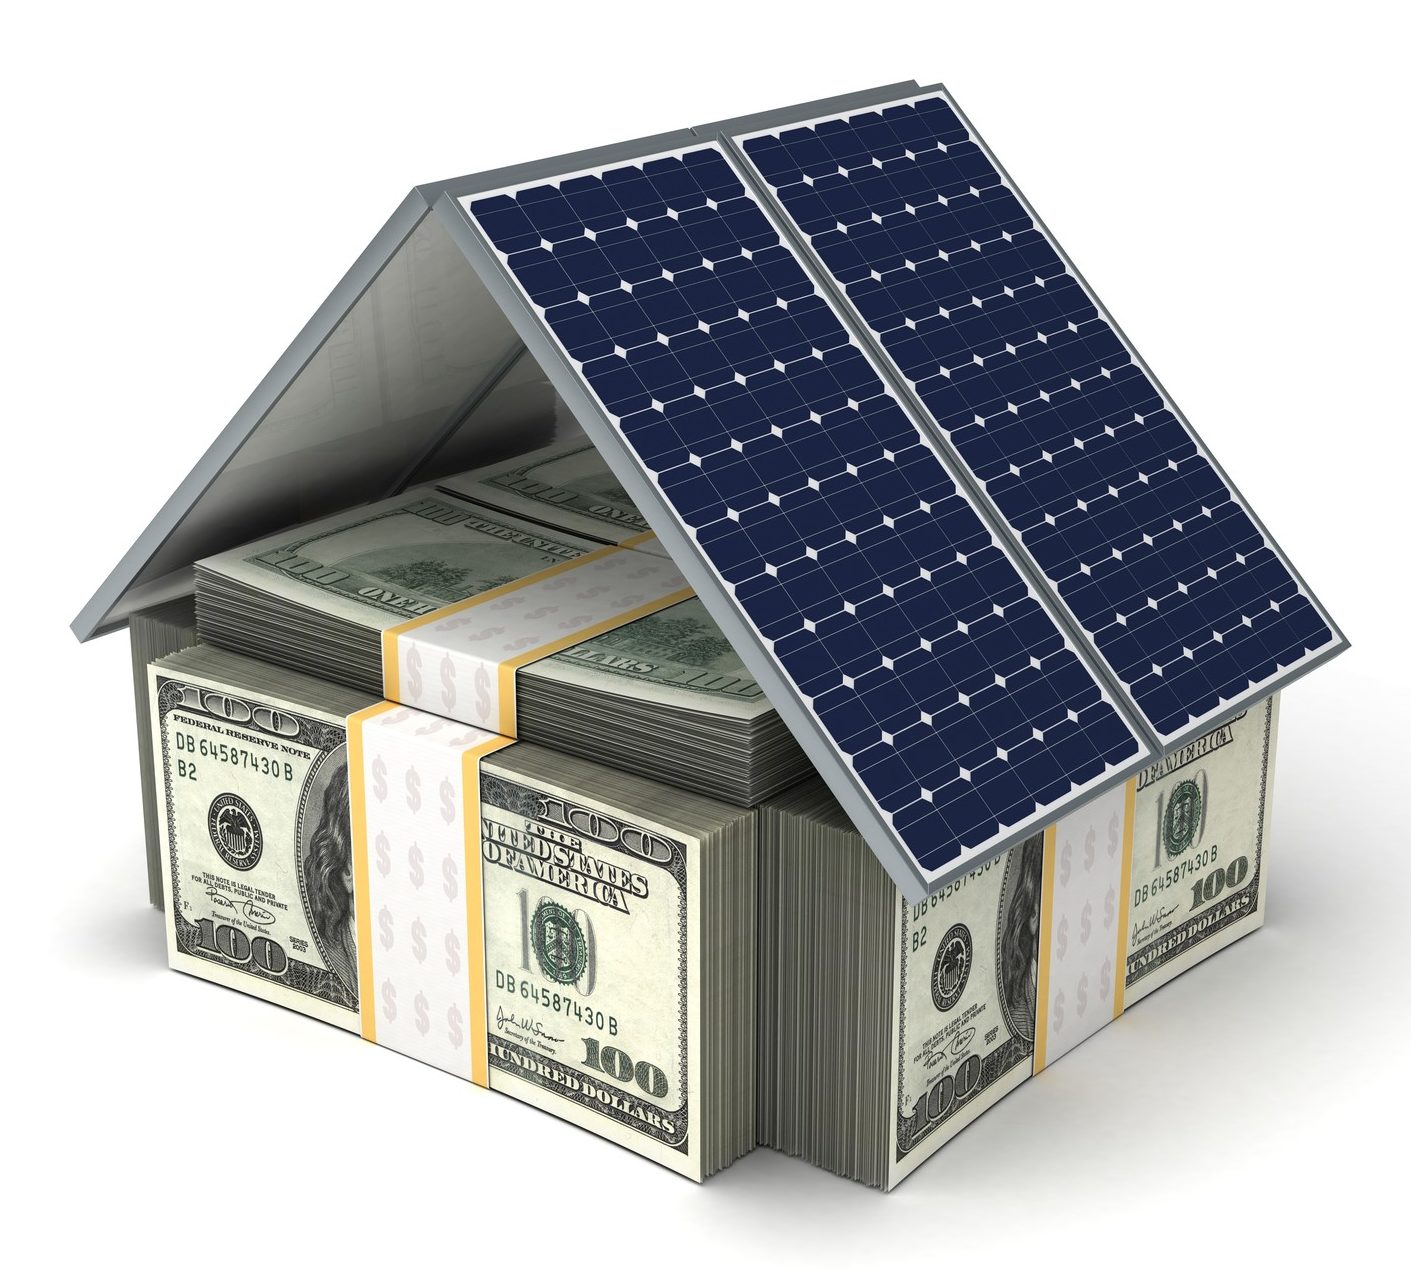 figurative model of home with roof made of solar panels and stack of American $100 bills inside